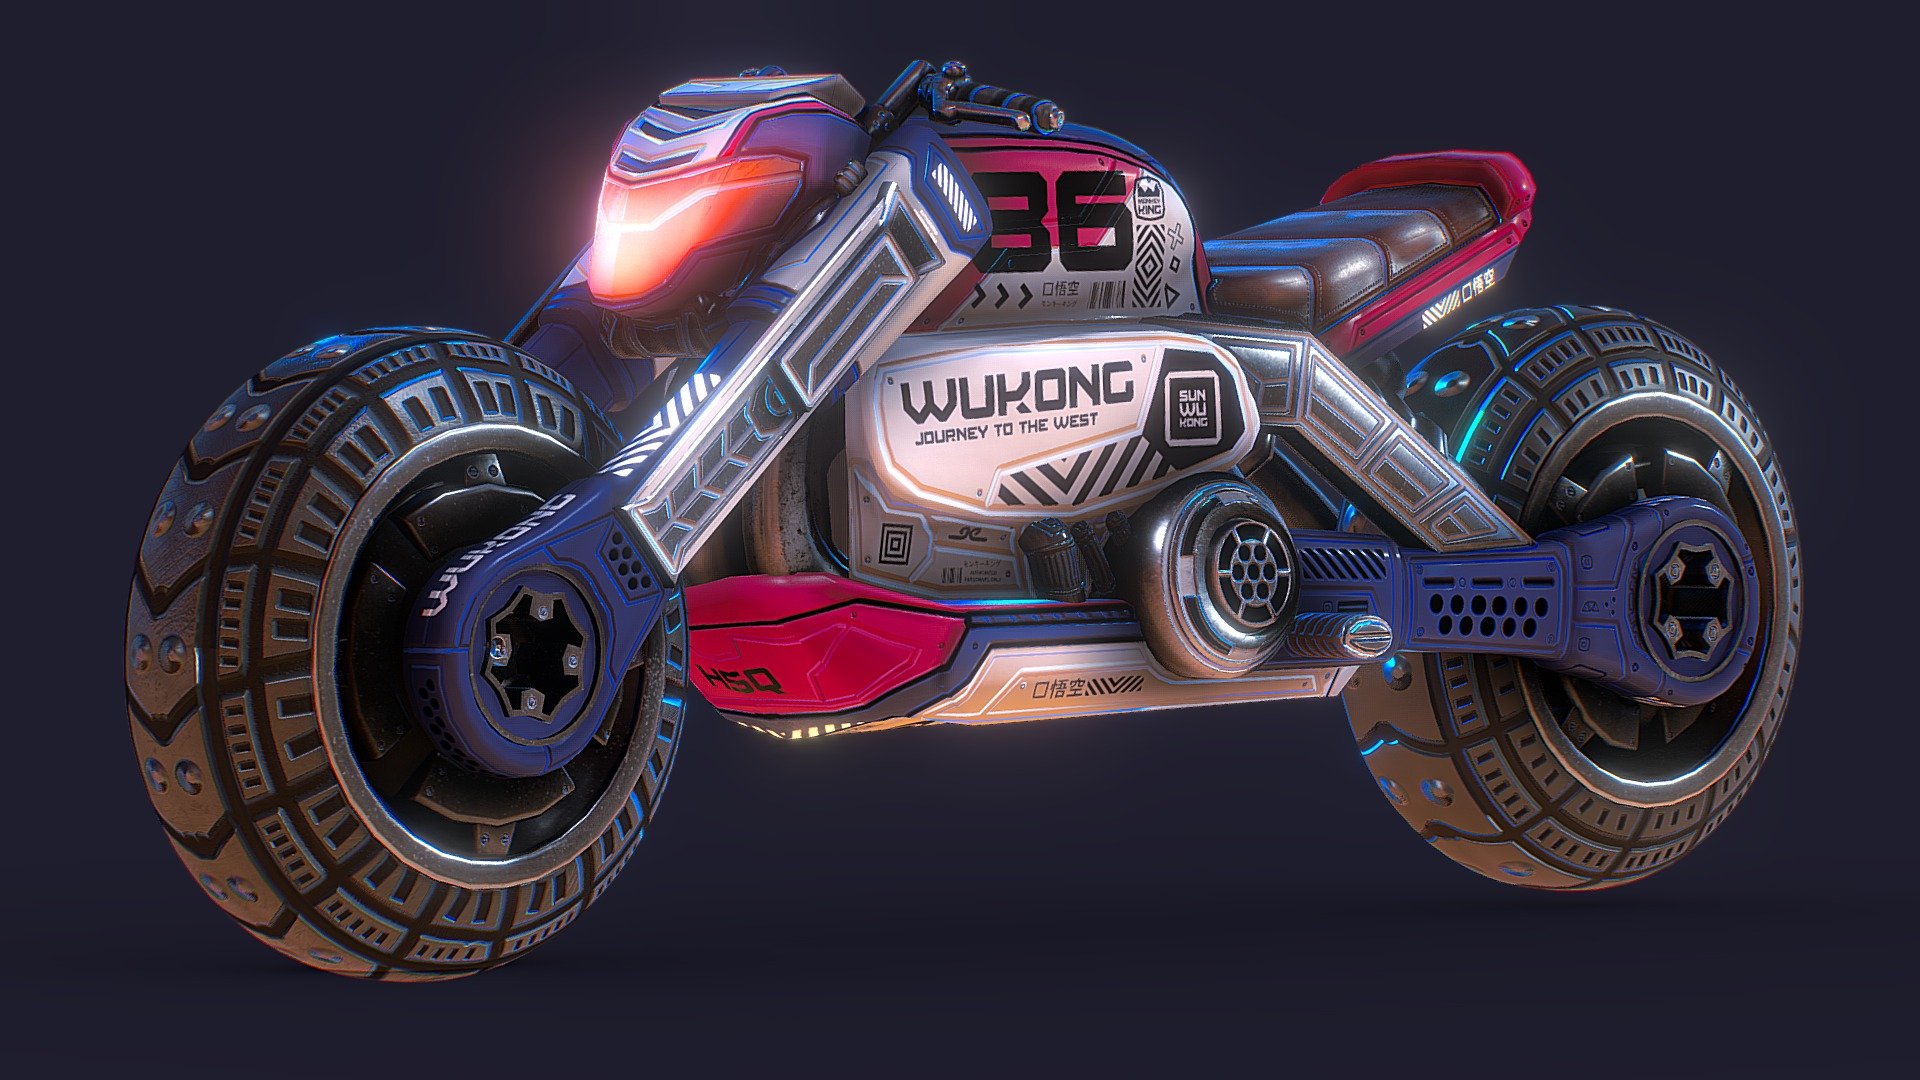 Lowpoly Cyberpunk Motorcycle - Sun Wukong's Bike

3D model made in Blender 2.9 ( FBX File )
This bike real name is Bai Long Ma (The White Dragon Horse) In Journey to the West, Bai Longma is actually a dragon prince Ao Lie who is the third son of the Dragon King of the West Sea. He once set a fire that destroyed a pearl that was a gift from the Jade Emperor. He was about to be executed for committing this offense when Guanyin appeared and pleaded for his life. (wiki)

This model contains:

. 1 Cyberpunk Motorcyle

. 3 Texture variations

3D Details :

Objects : 3 / 3 Subdiv 0 : Verts :25,109 Faces : 24,433 Tris : 48,170 - Lowpoly Cyberpunk Motorcycle - Sun Wukong's Bike - Buy Royalty Free 3D model by Hisqie Furqoni (@hisqiefurqoni) 3d model